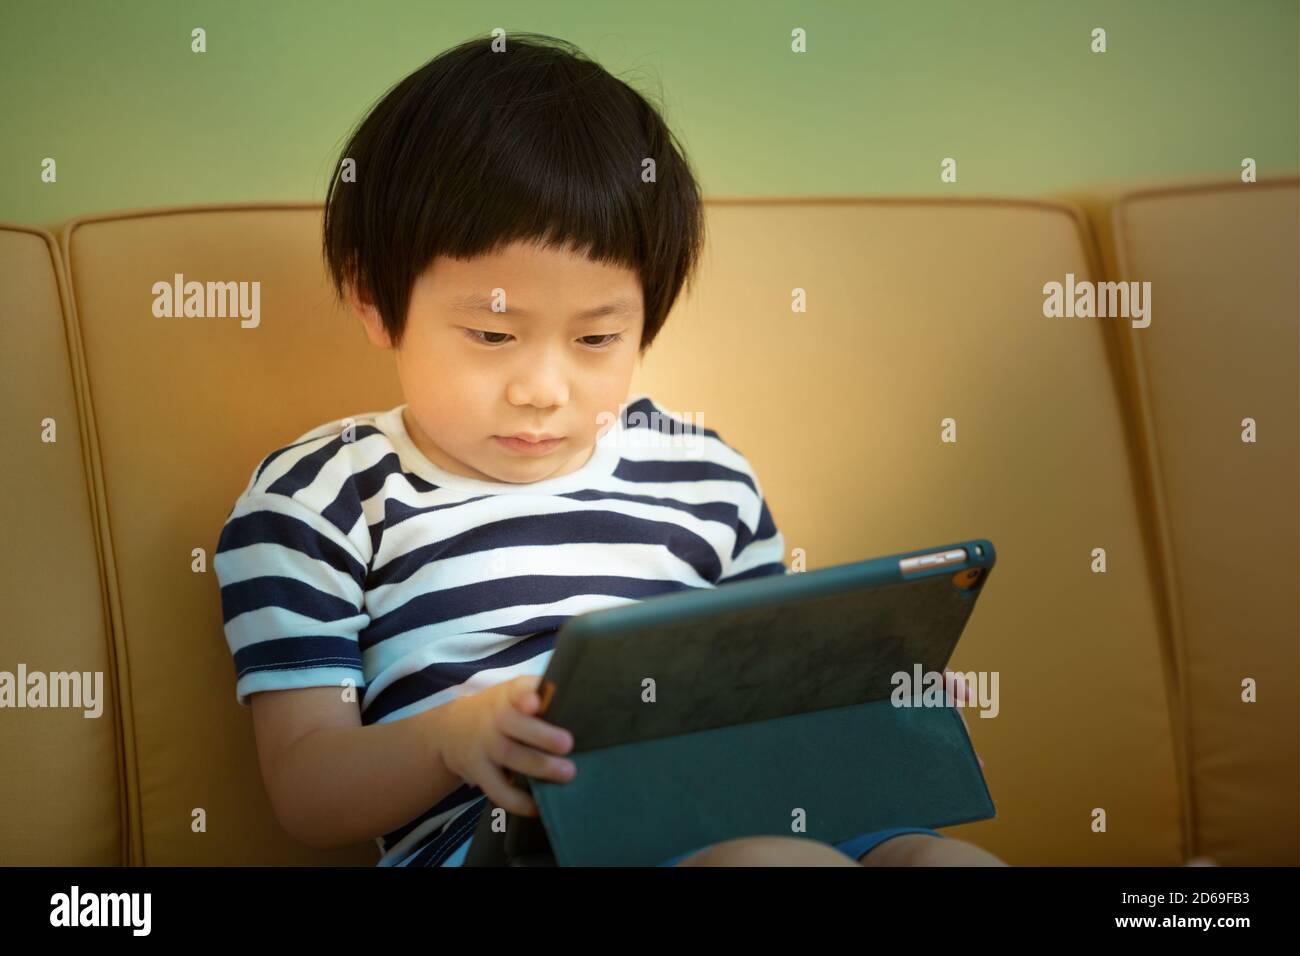 boy sitting on couch with Tablet computer, child spending too much time on computer concept Stock Photo